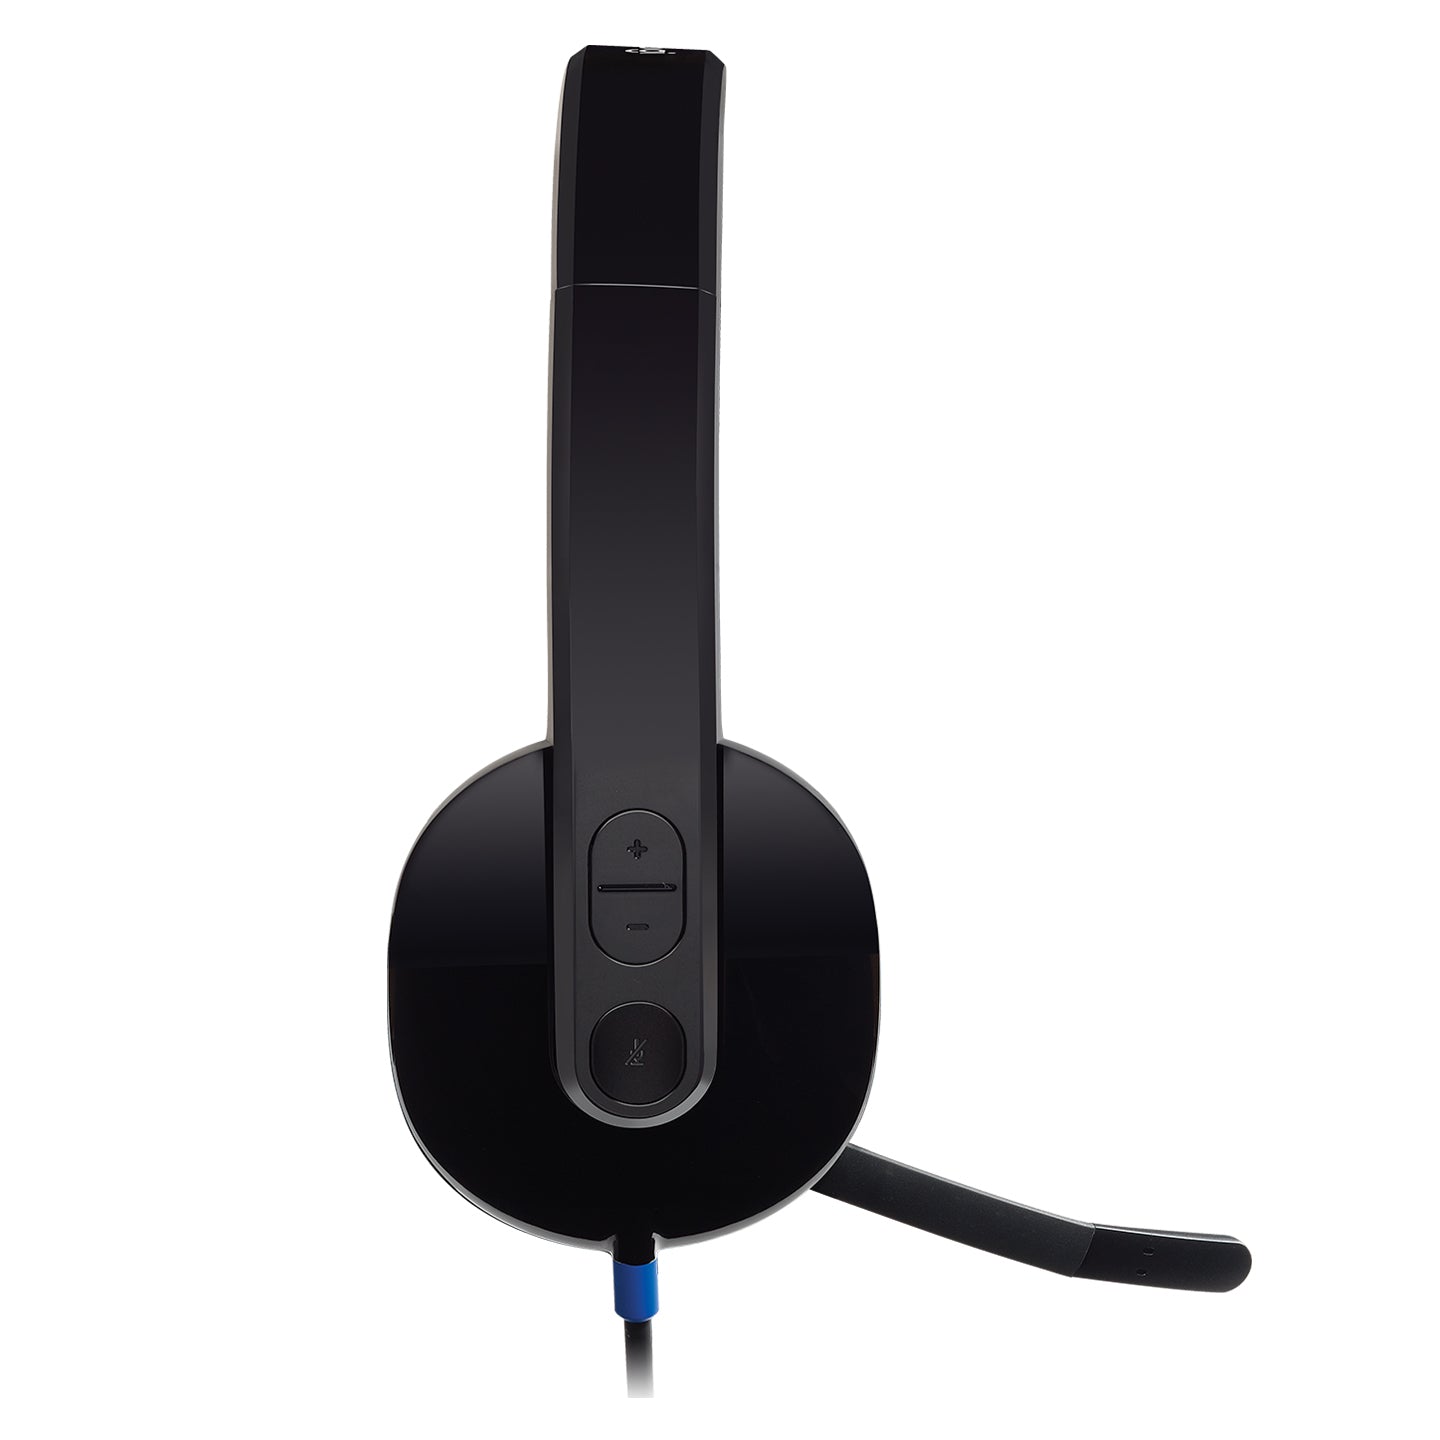 Logitech H540 USB Computer Headset Wired Headphones with Noise Cancelling Mic, On-ear Volume Controls, Stereo Sound